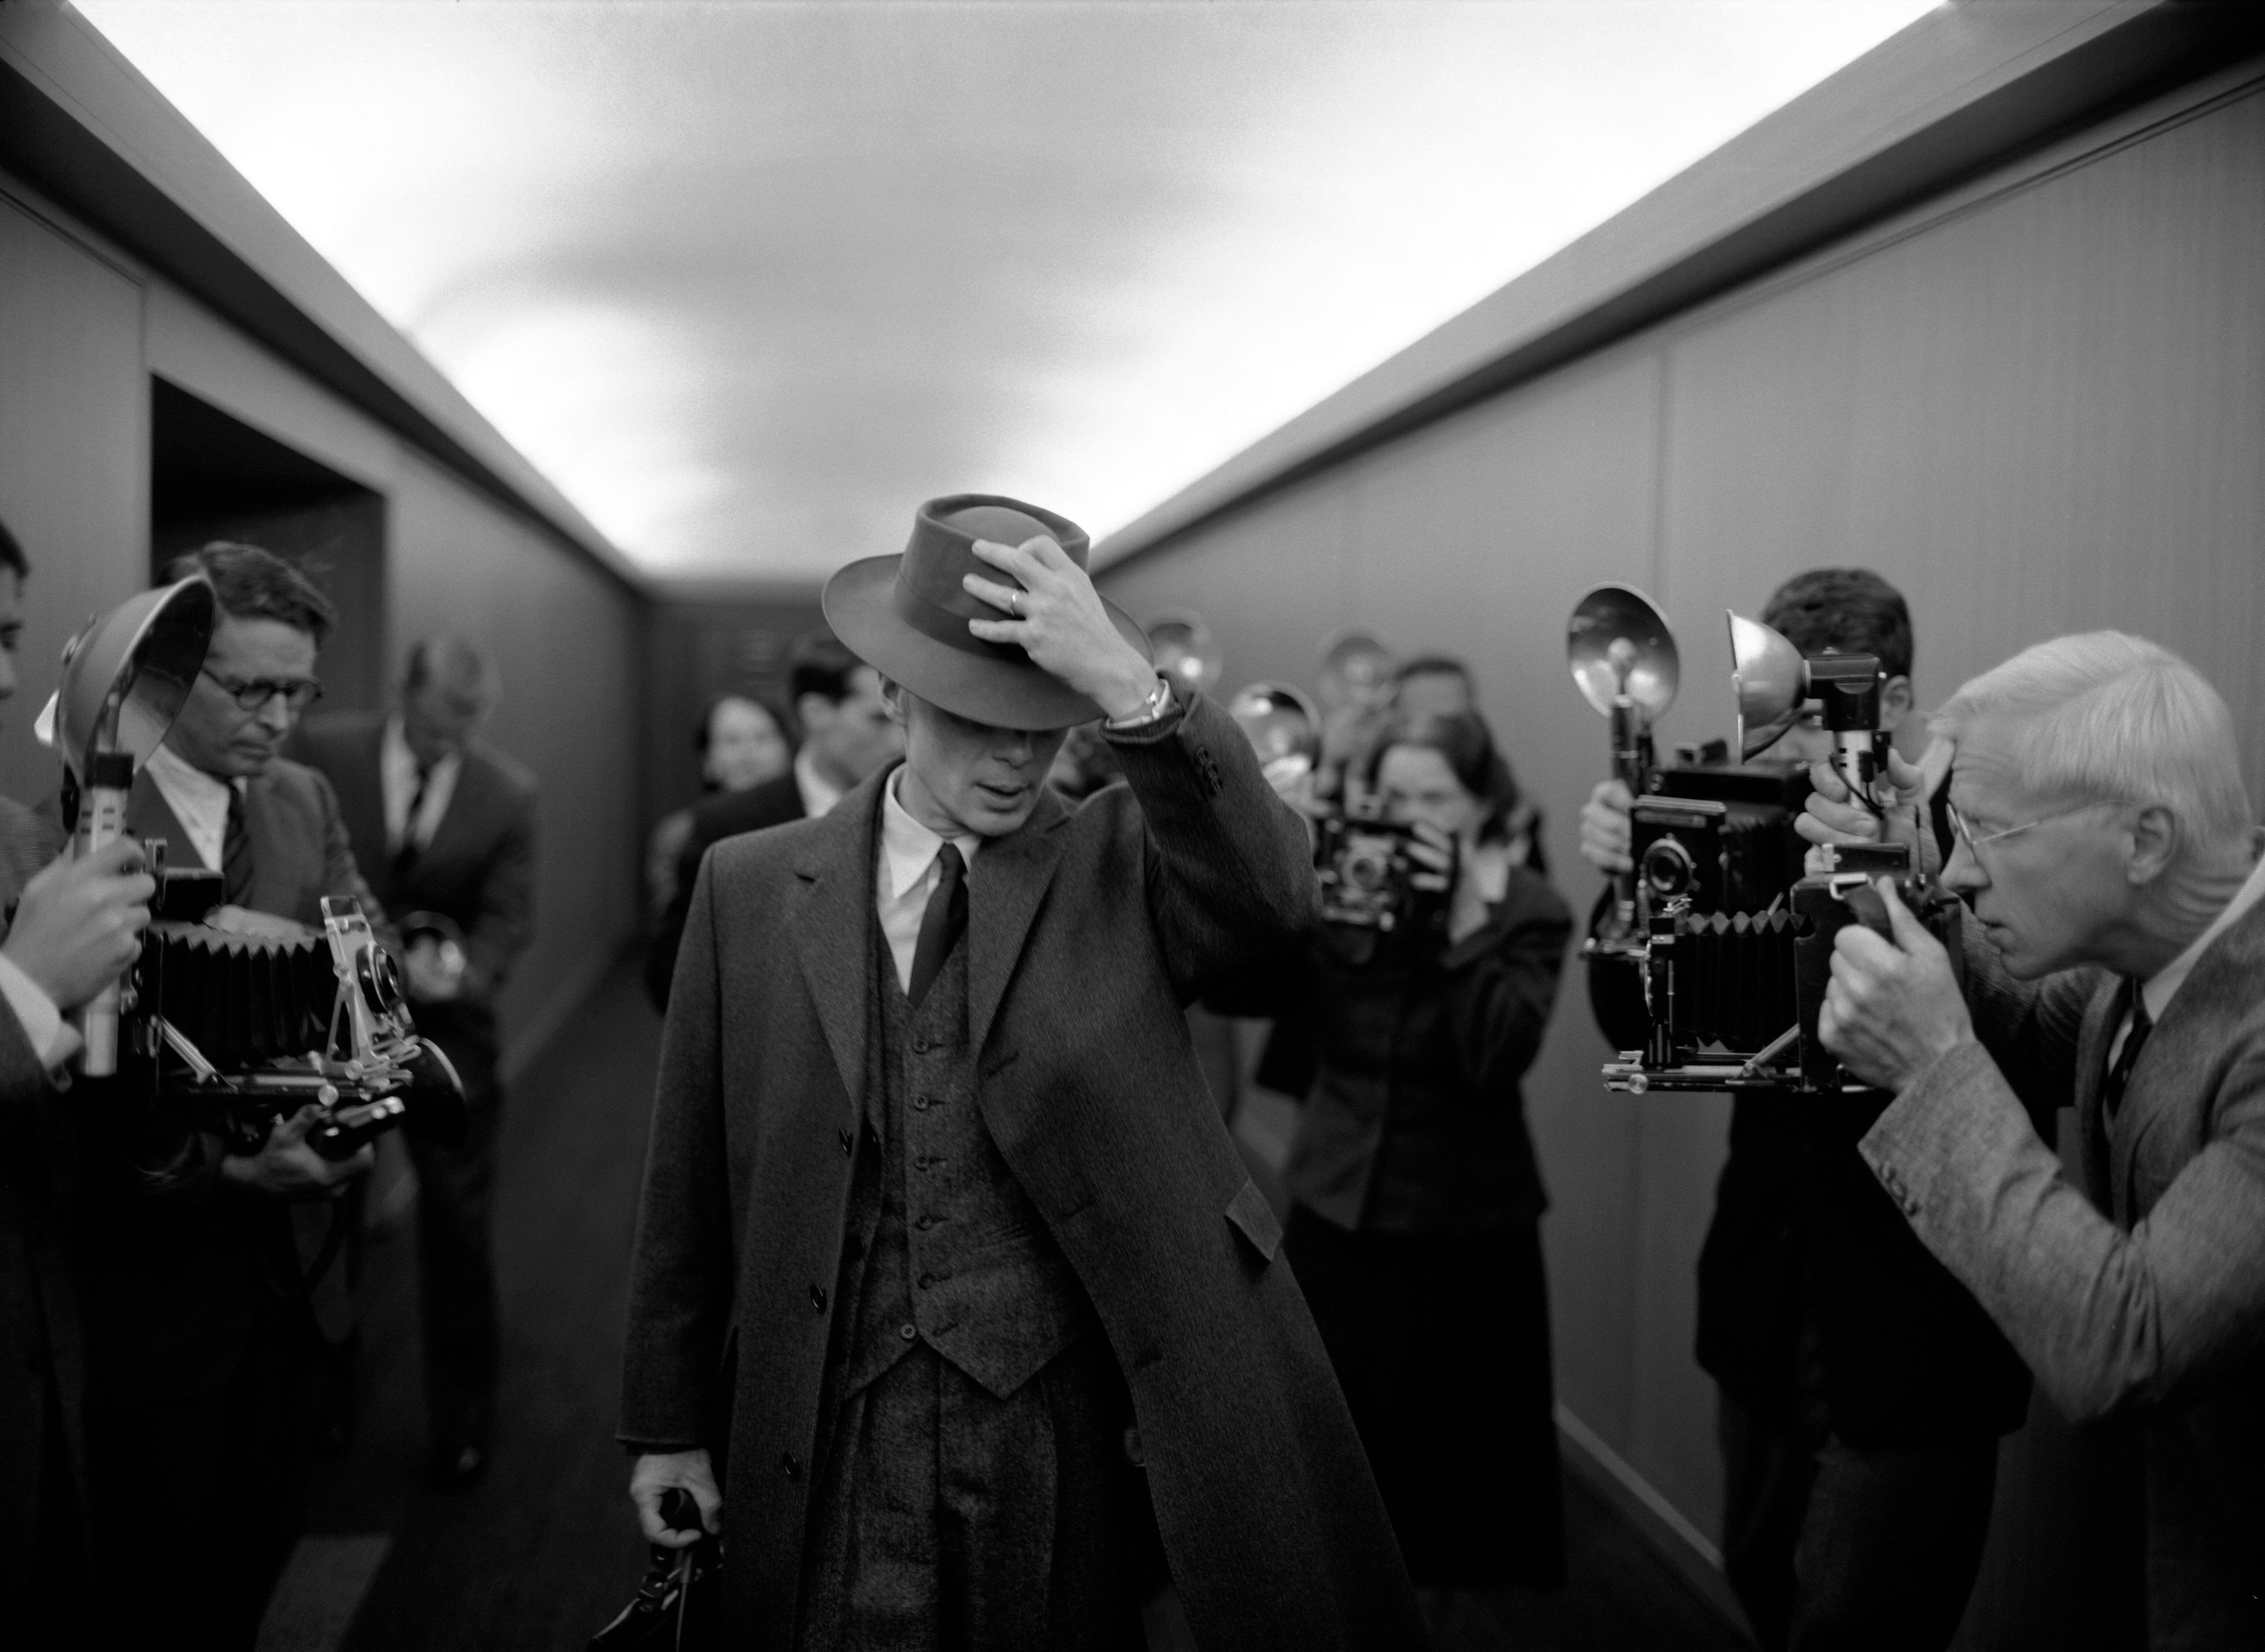 A man in a hat and suit walks through a hallway full of photographers